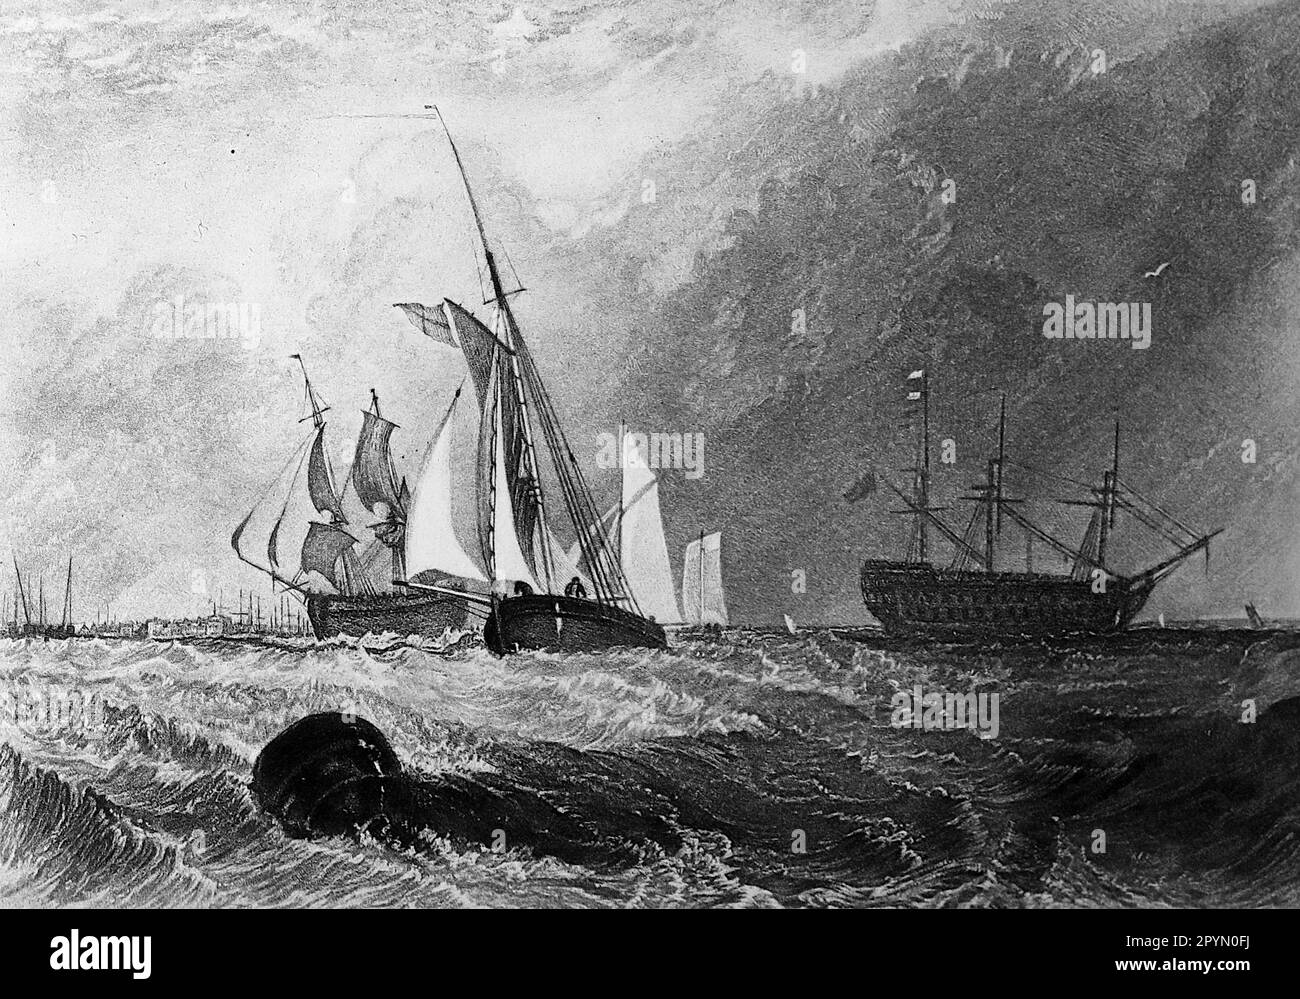 An engraving by J.M.W. Turner: Sheerness: Engraving of ships on a rough sea off the coast of Sheerness, Isle of Sheppey, North Kent. c1856. Stock Photo